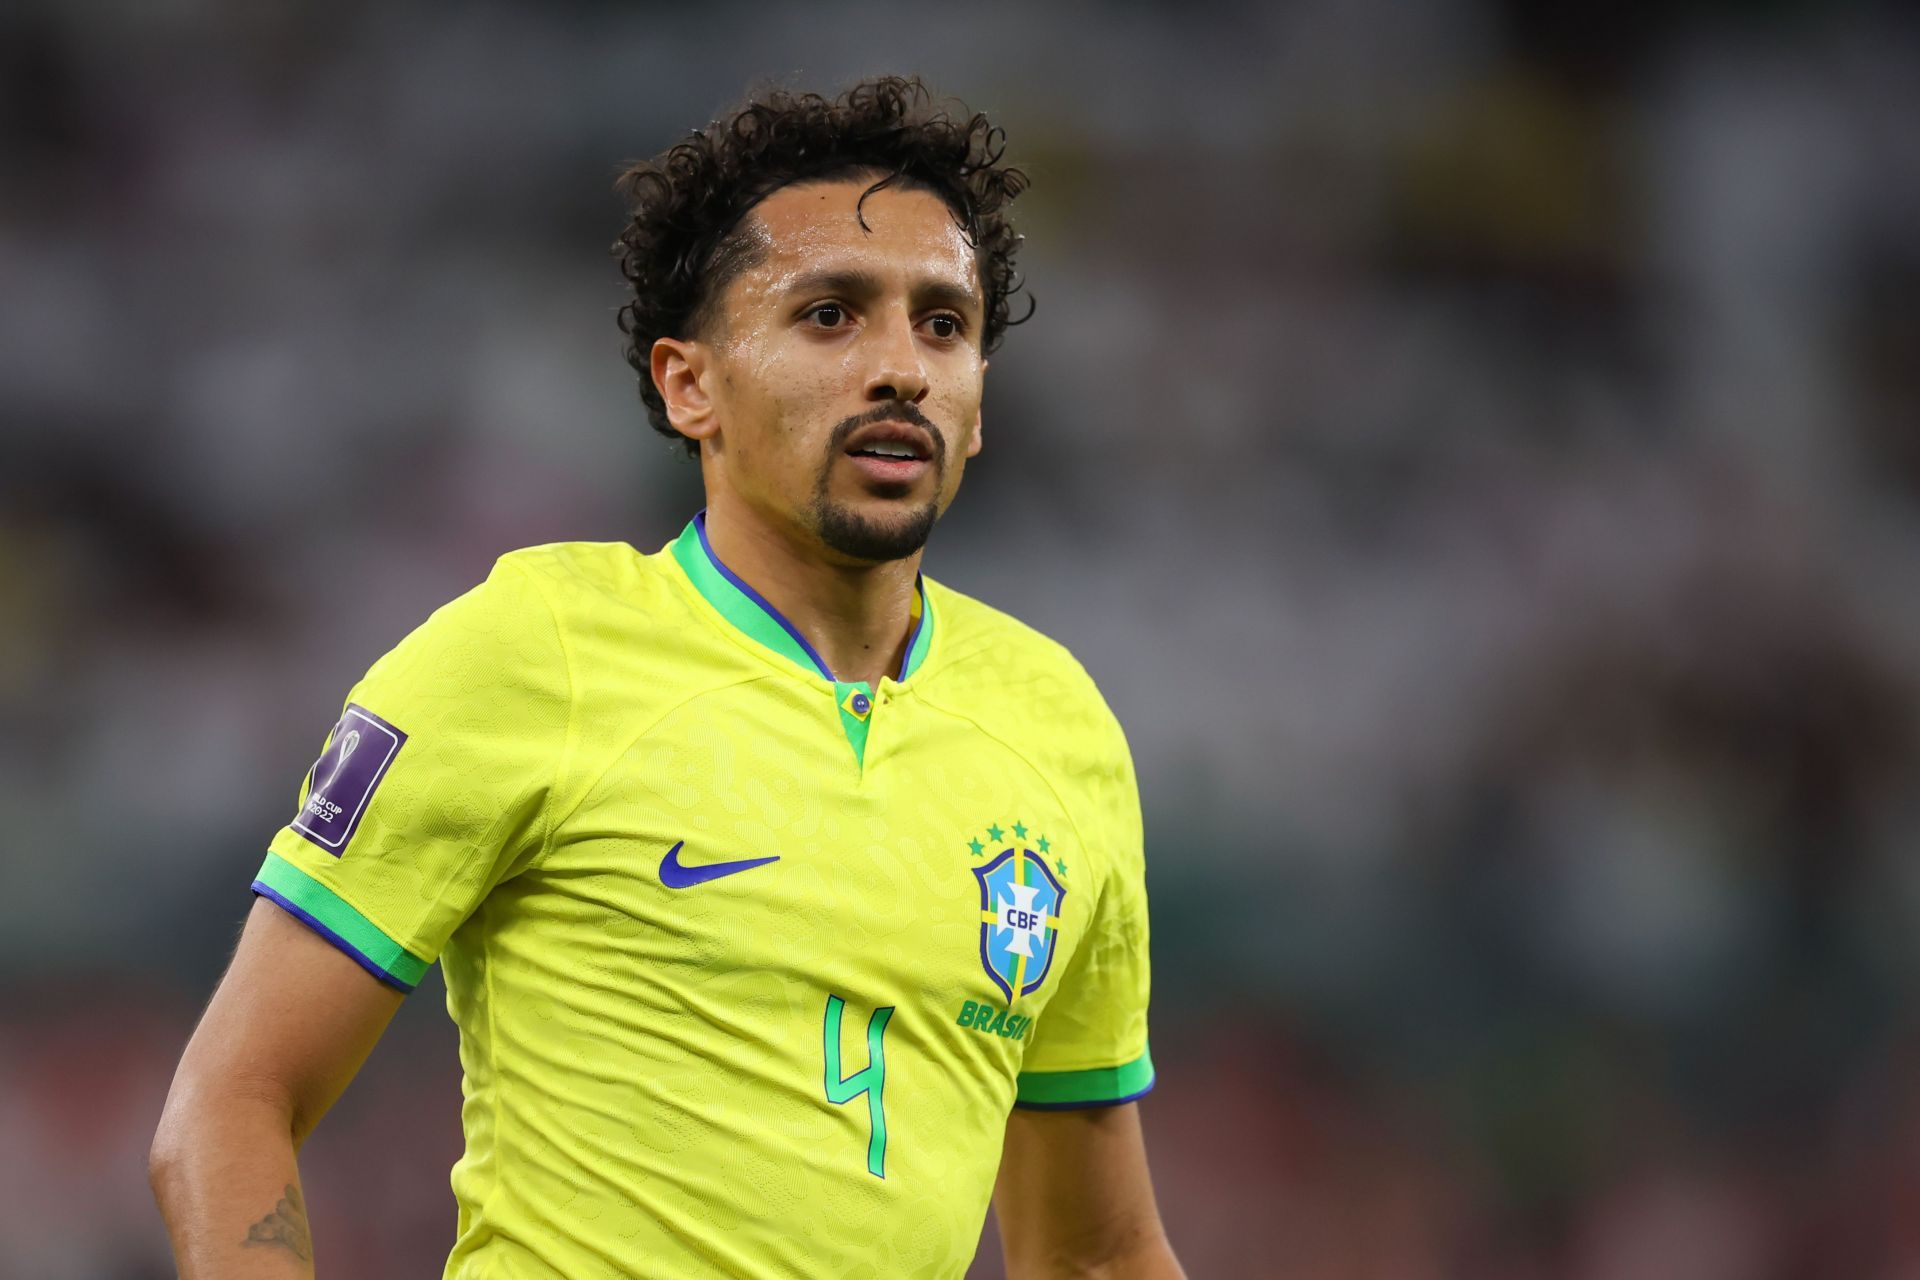 Marquinhos spoke about the need for improvements after the defeat.